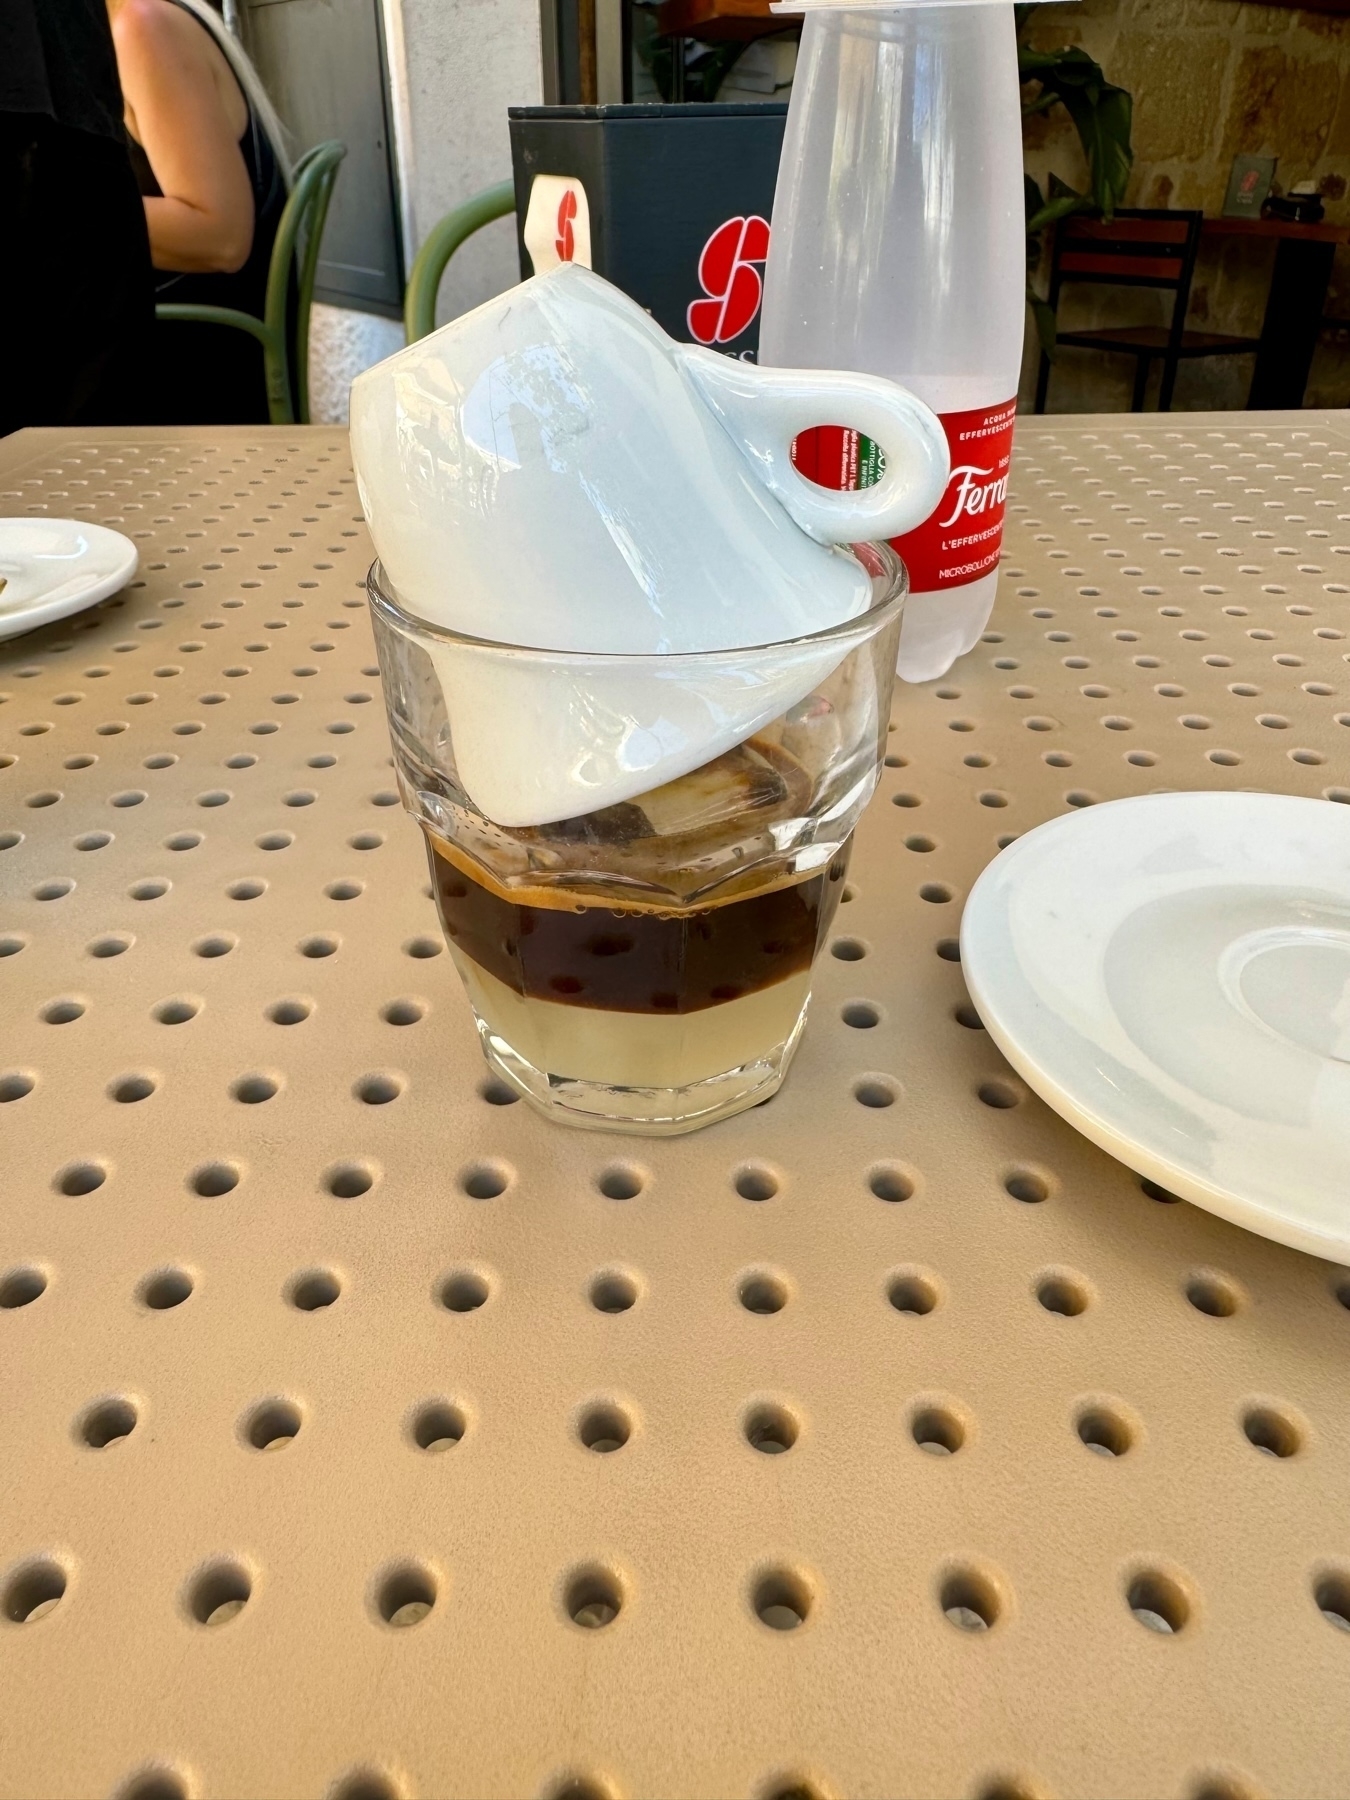 A white coffee cup is placed upside down inside a glass filled with a two-layered liquid, coffee and almond syrup. The setup is on a perforated beige table next to an empty white plate and a bottle of Ferrandina water.